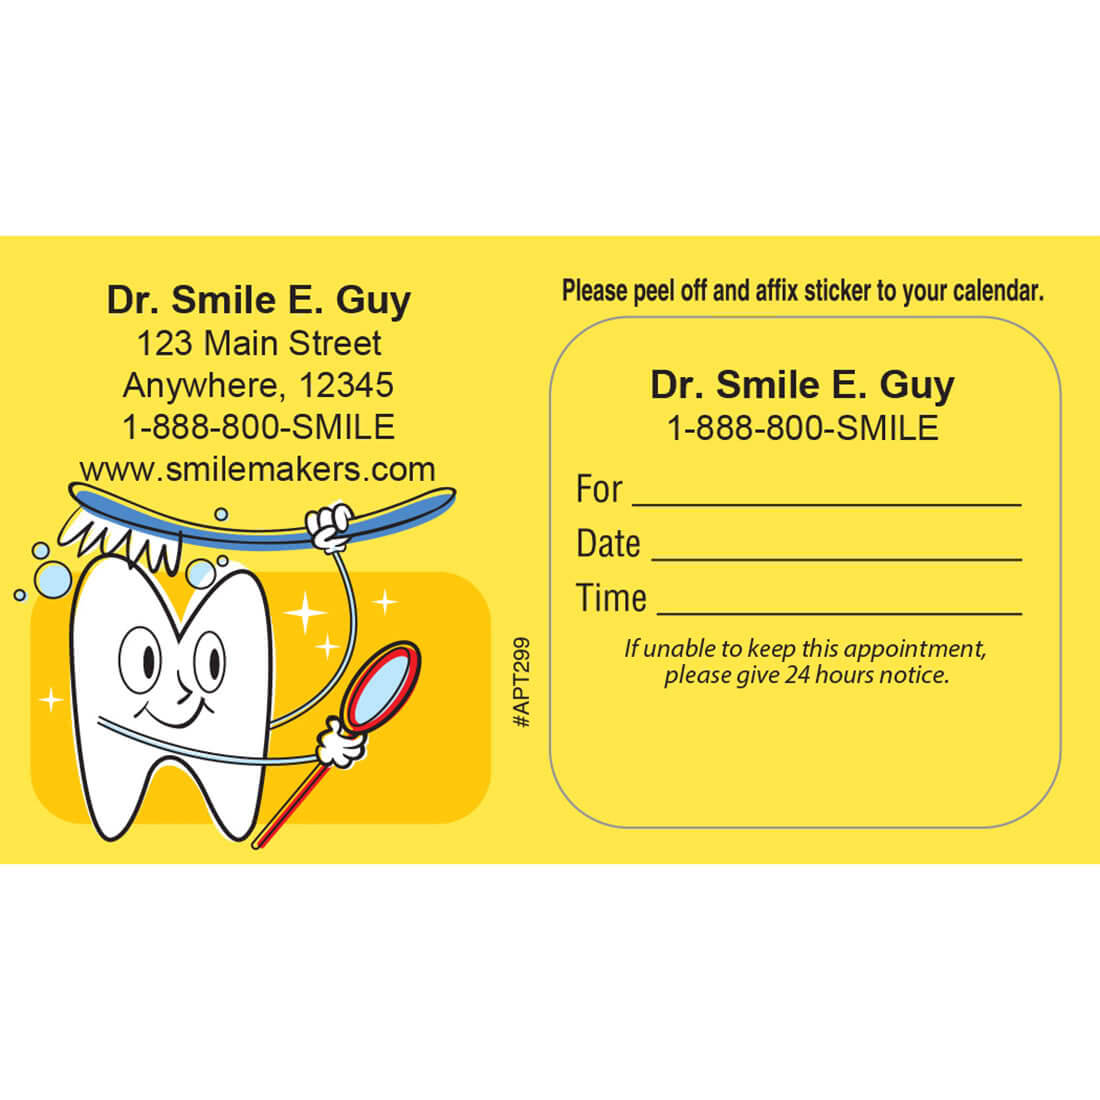 Dental Clinic Appointment Card Template In Psd, Ai & Vector for Dentist